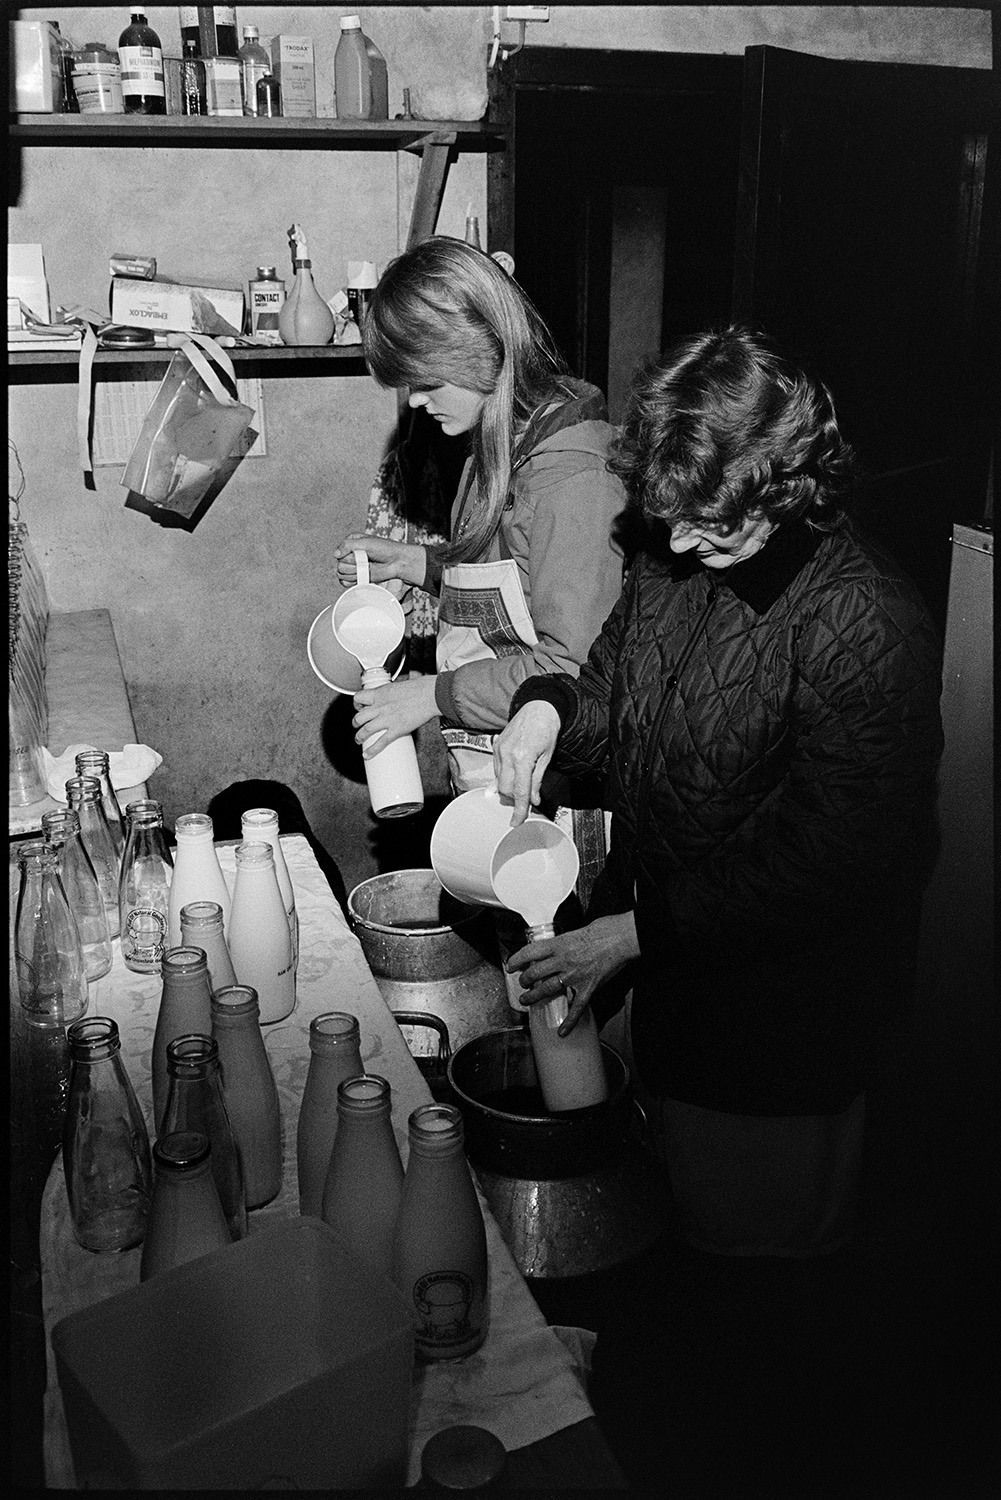 Women in dairy filling milk bottles, early morning.
[Two women, one of which is possibly Marylyn Bourne, filling milk bottles with milk from jugs in the dairy at Jeffrys Farm, Beaford, also known as Mill Road Farm.]